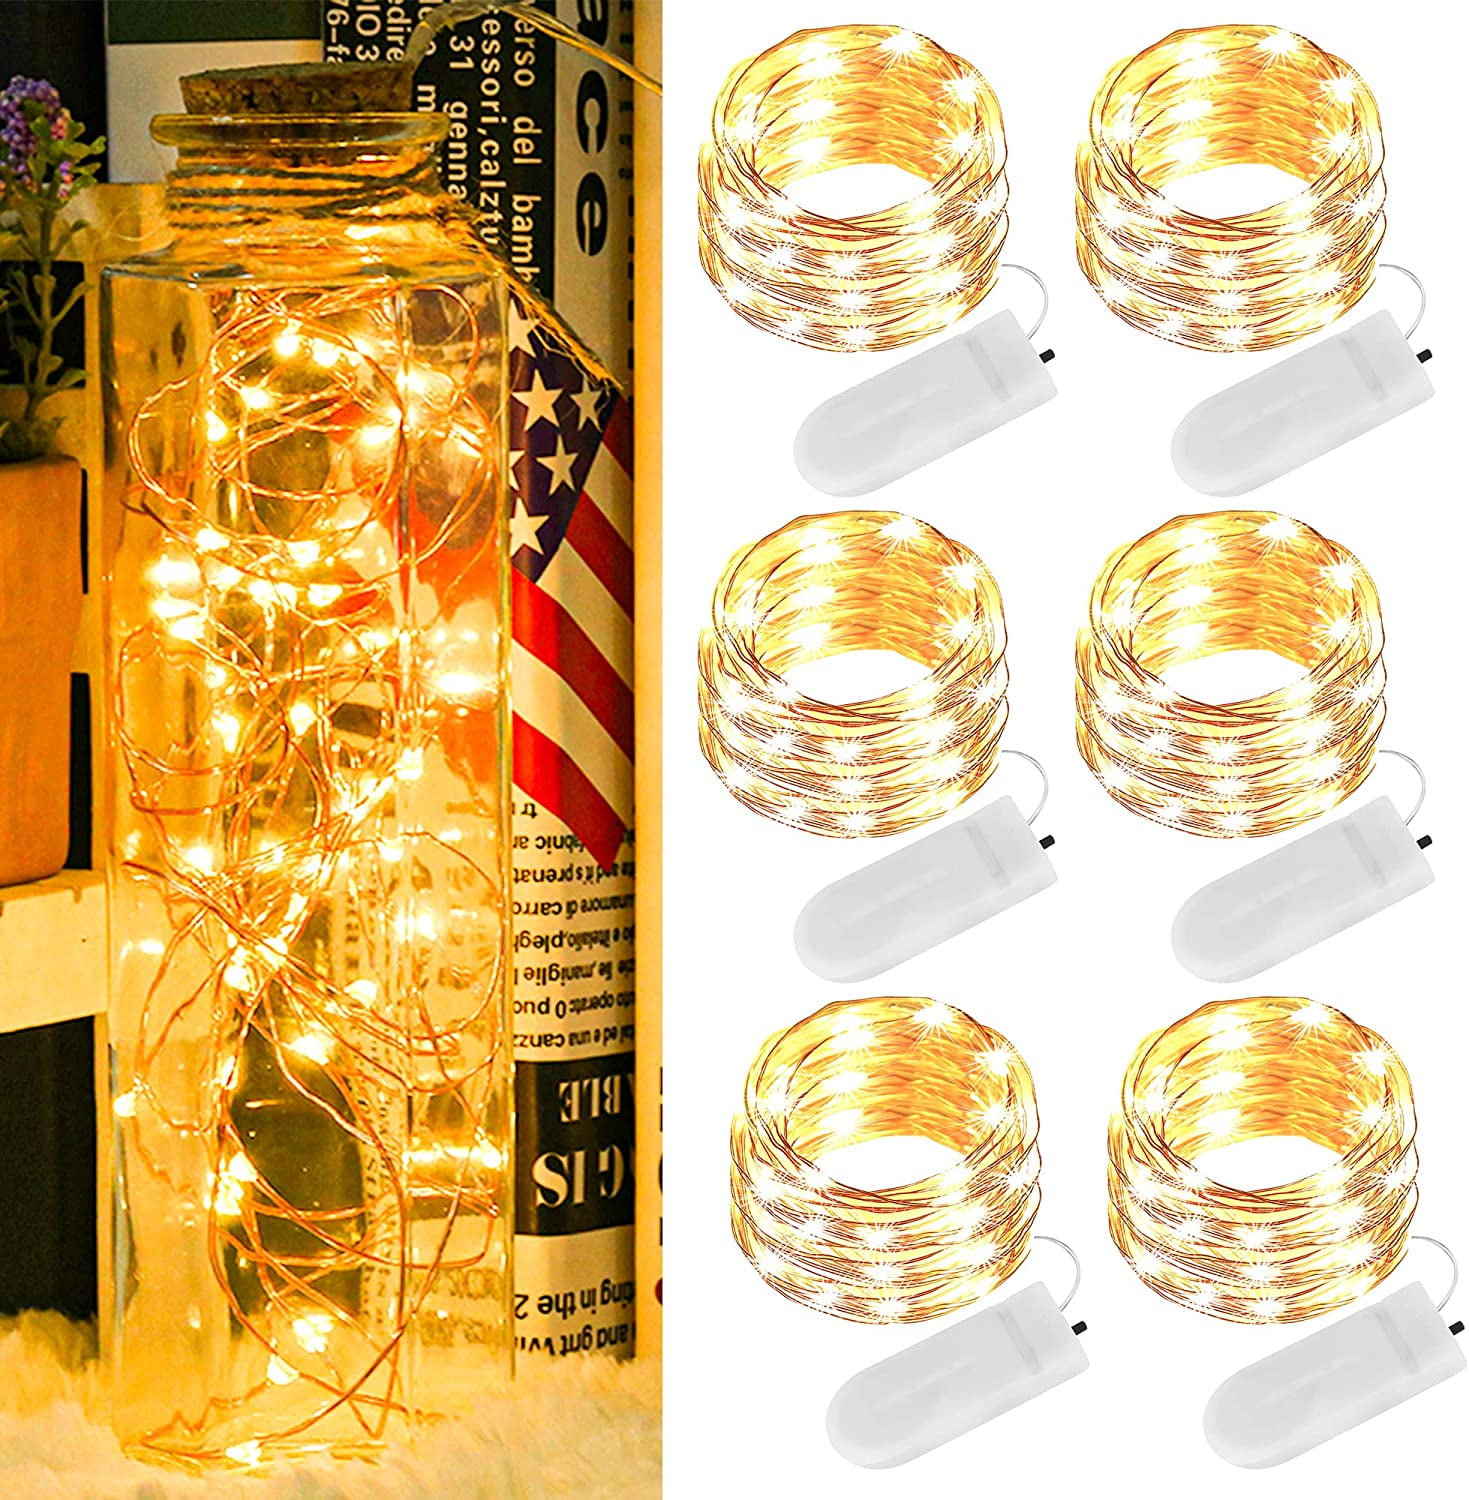 SALE 2M 20 LED Wire String Lights Fairy Wedding XMAS Party Christmas Supplies 